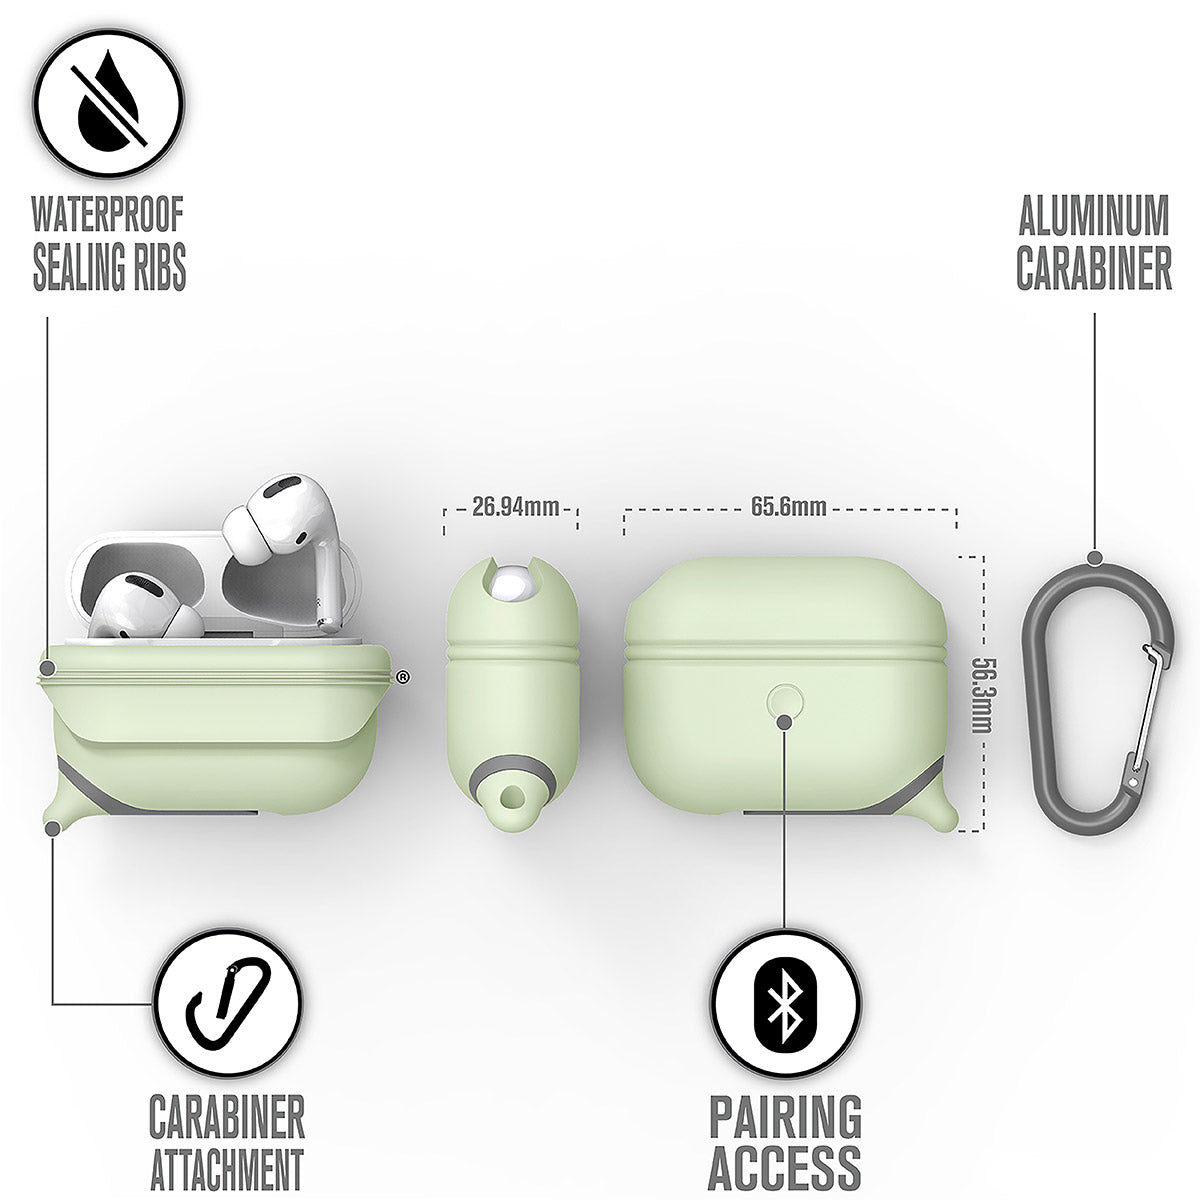 catalyst airpods pro gen 2 1 waterproof case carabiner special edition glow in the dark different views showing the sealing ribs carabiner attachment loop and pairing access text reads waterproof sealing ribs aluminum carabiner carabiner attachment pairing access